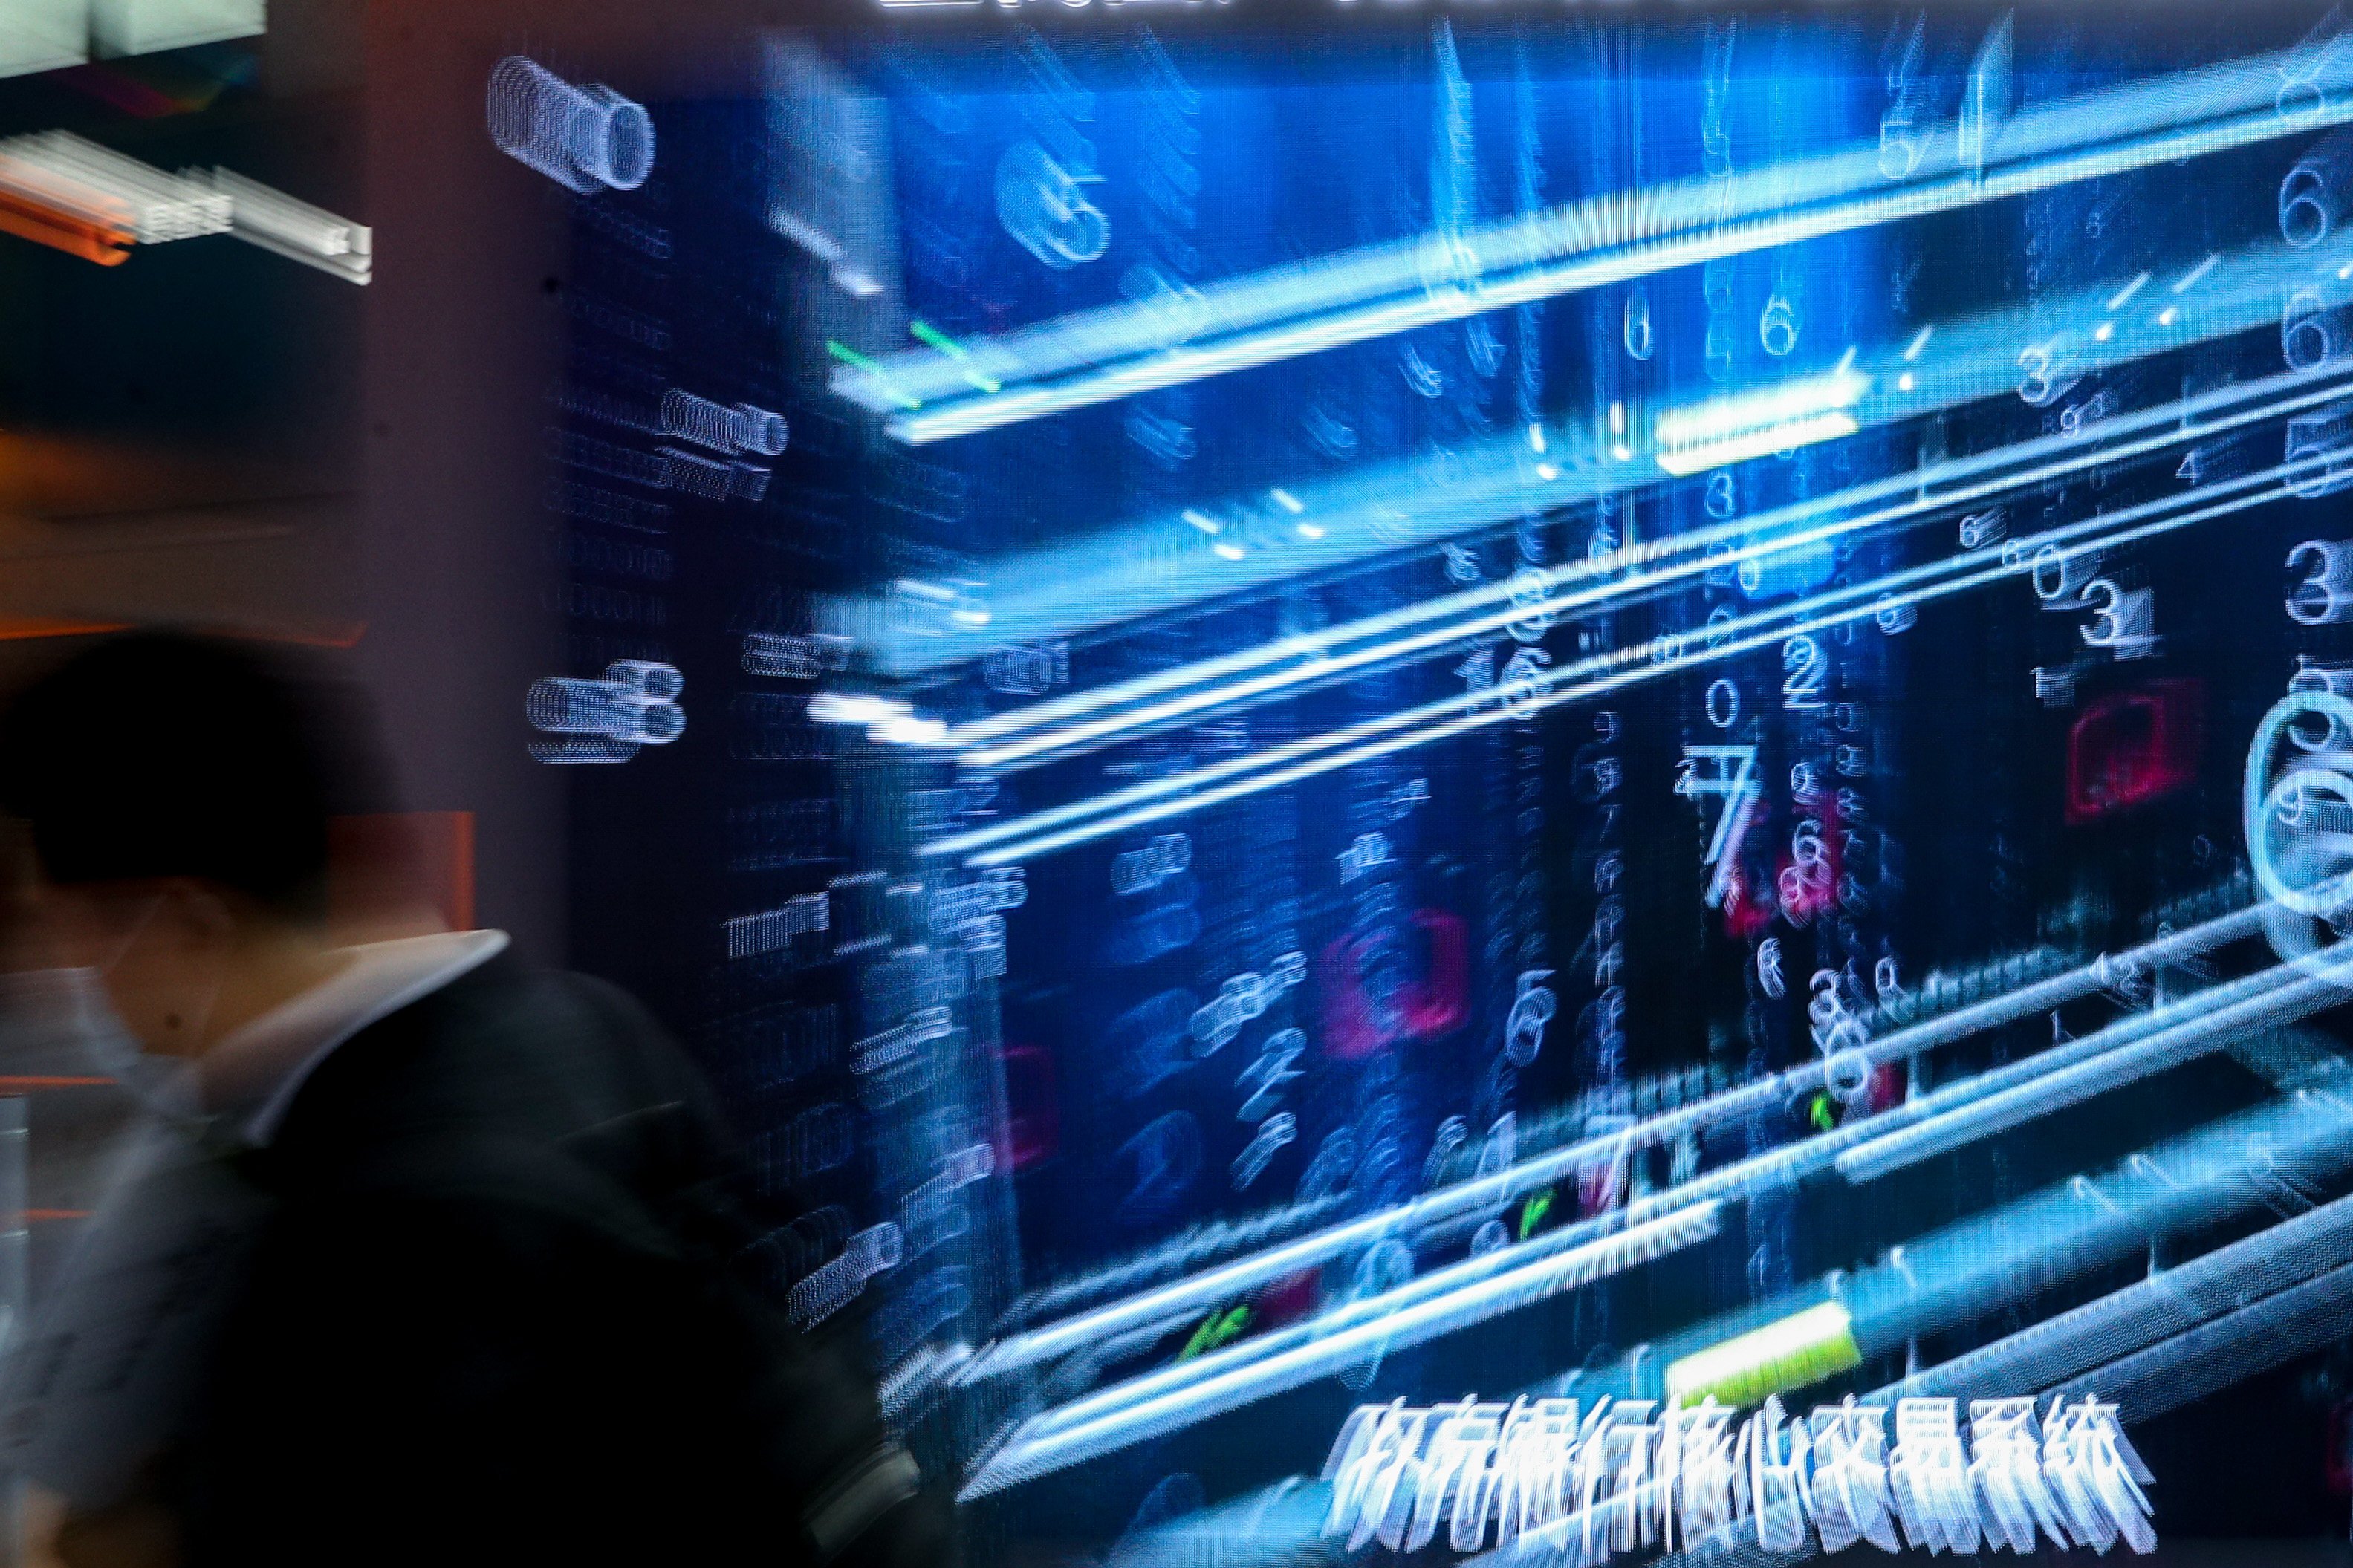 A visitor walks past a promotional video at the China International Big Data Industry Expo 2021 in Guiyang, Guizhou province on May 26, 2021. China passed two laws in September last year that restrict cross-border data flows and enforce localisation. Photo: Xinhua